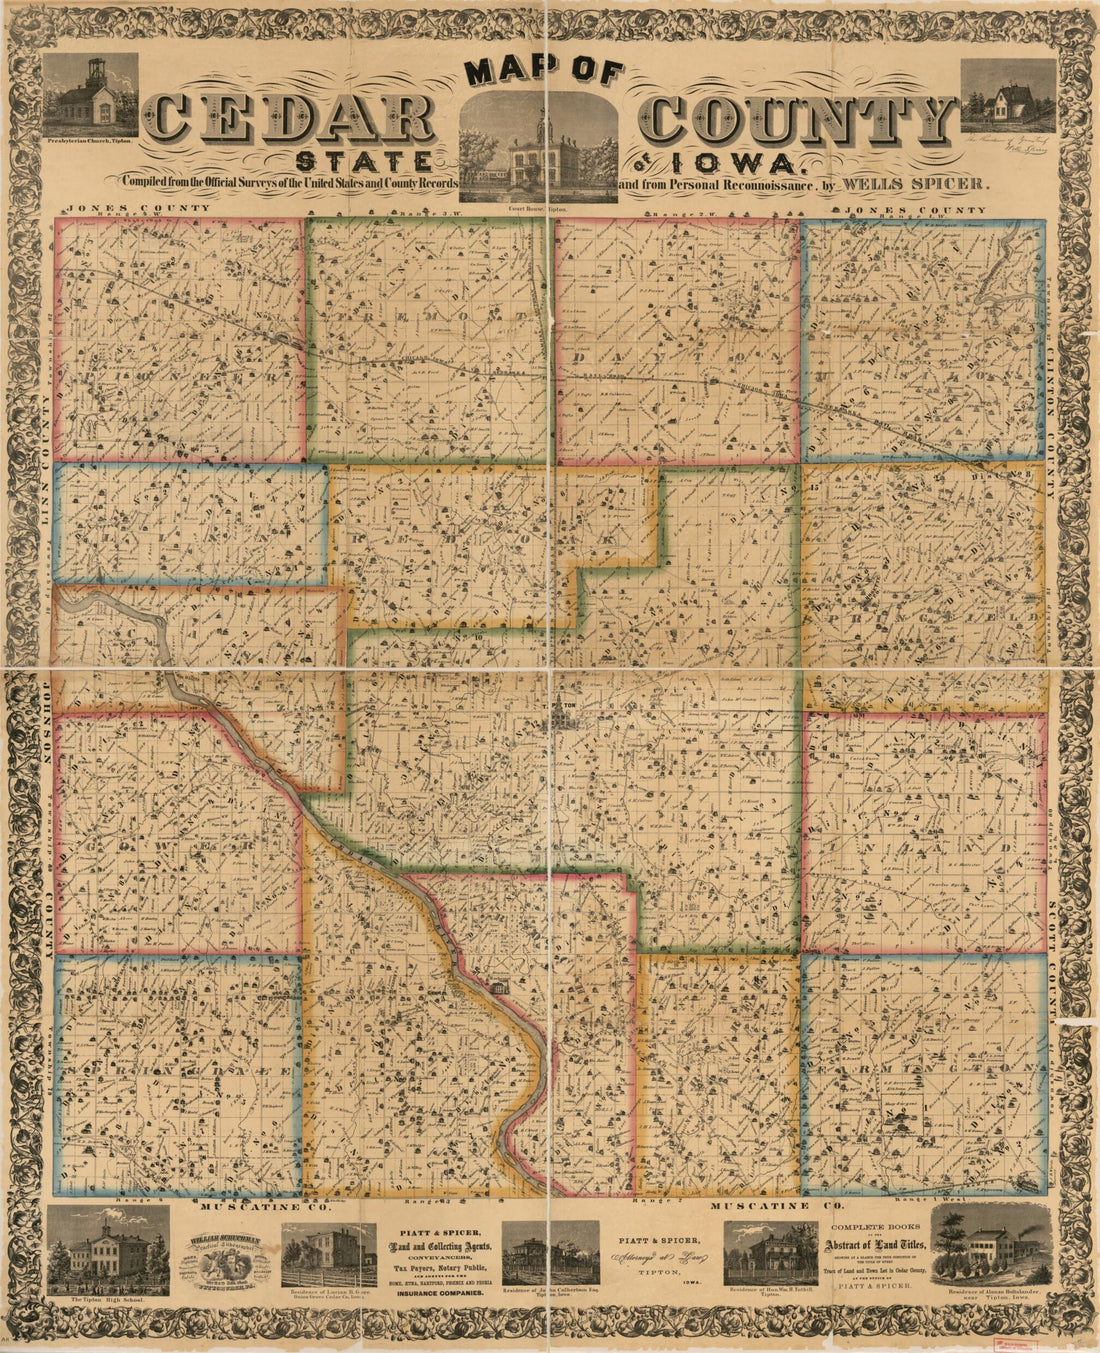 This old map of Map of Cedar County, State of Iowa from 1863 was created by Wells Spicer in 1863